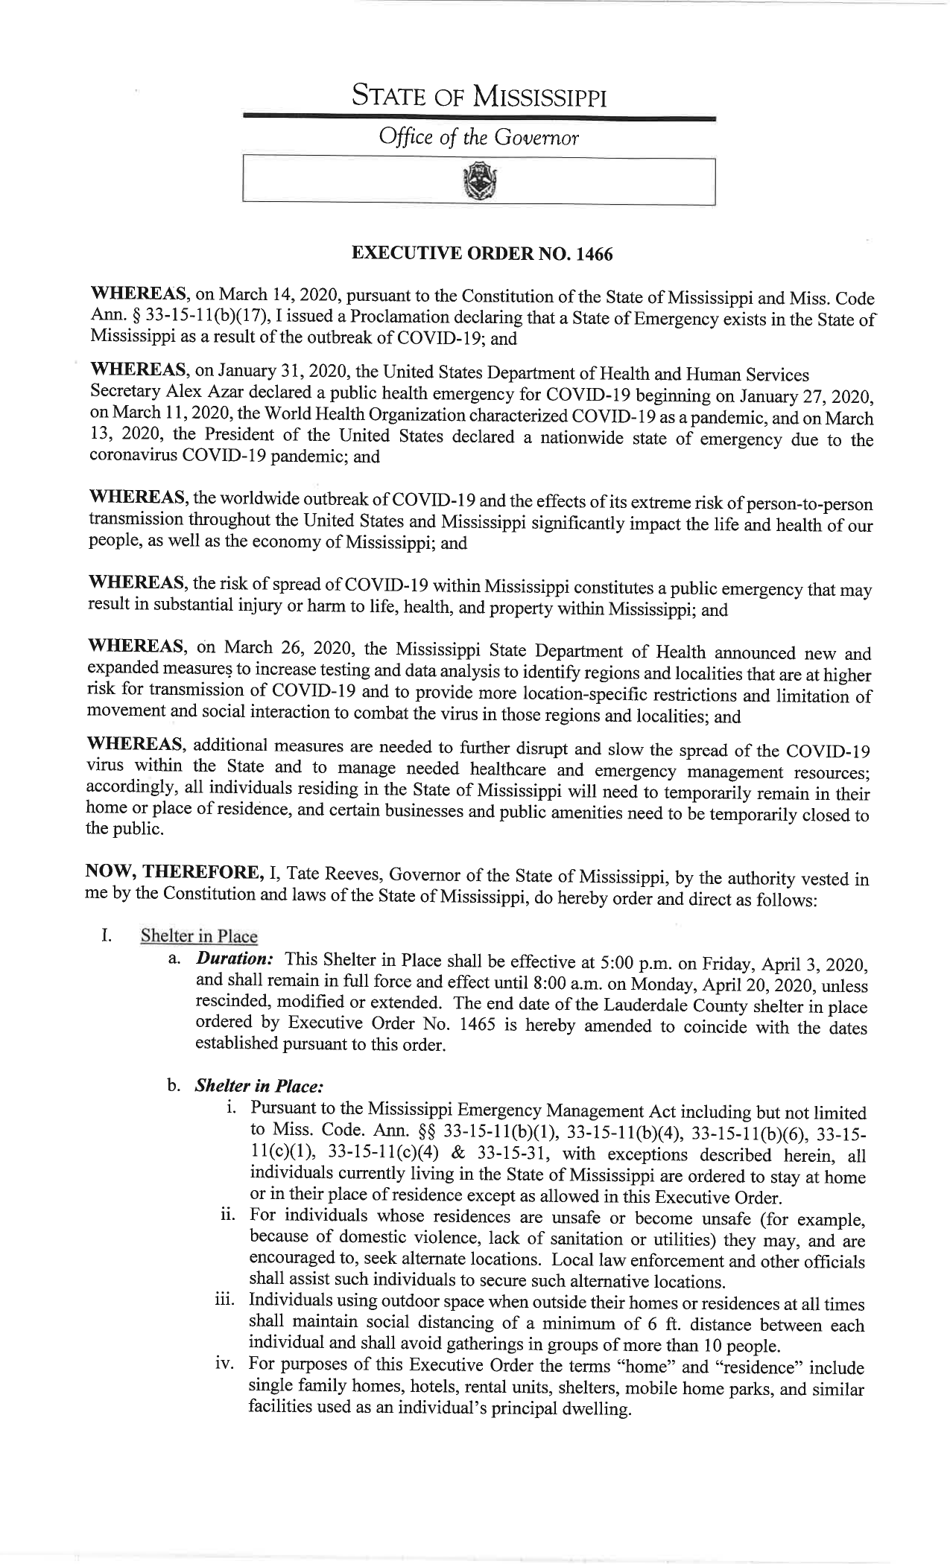 Executive Order No. 1466 - Mississippi, Page 1